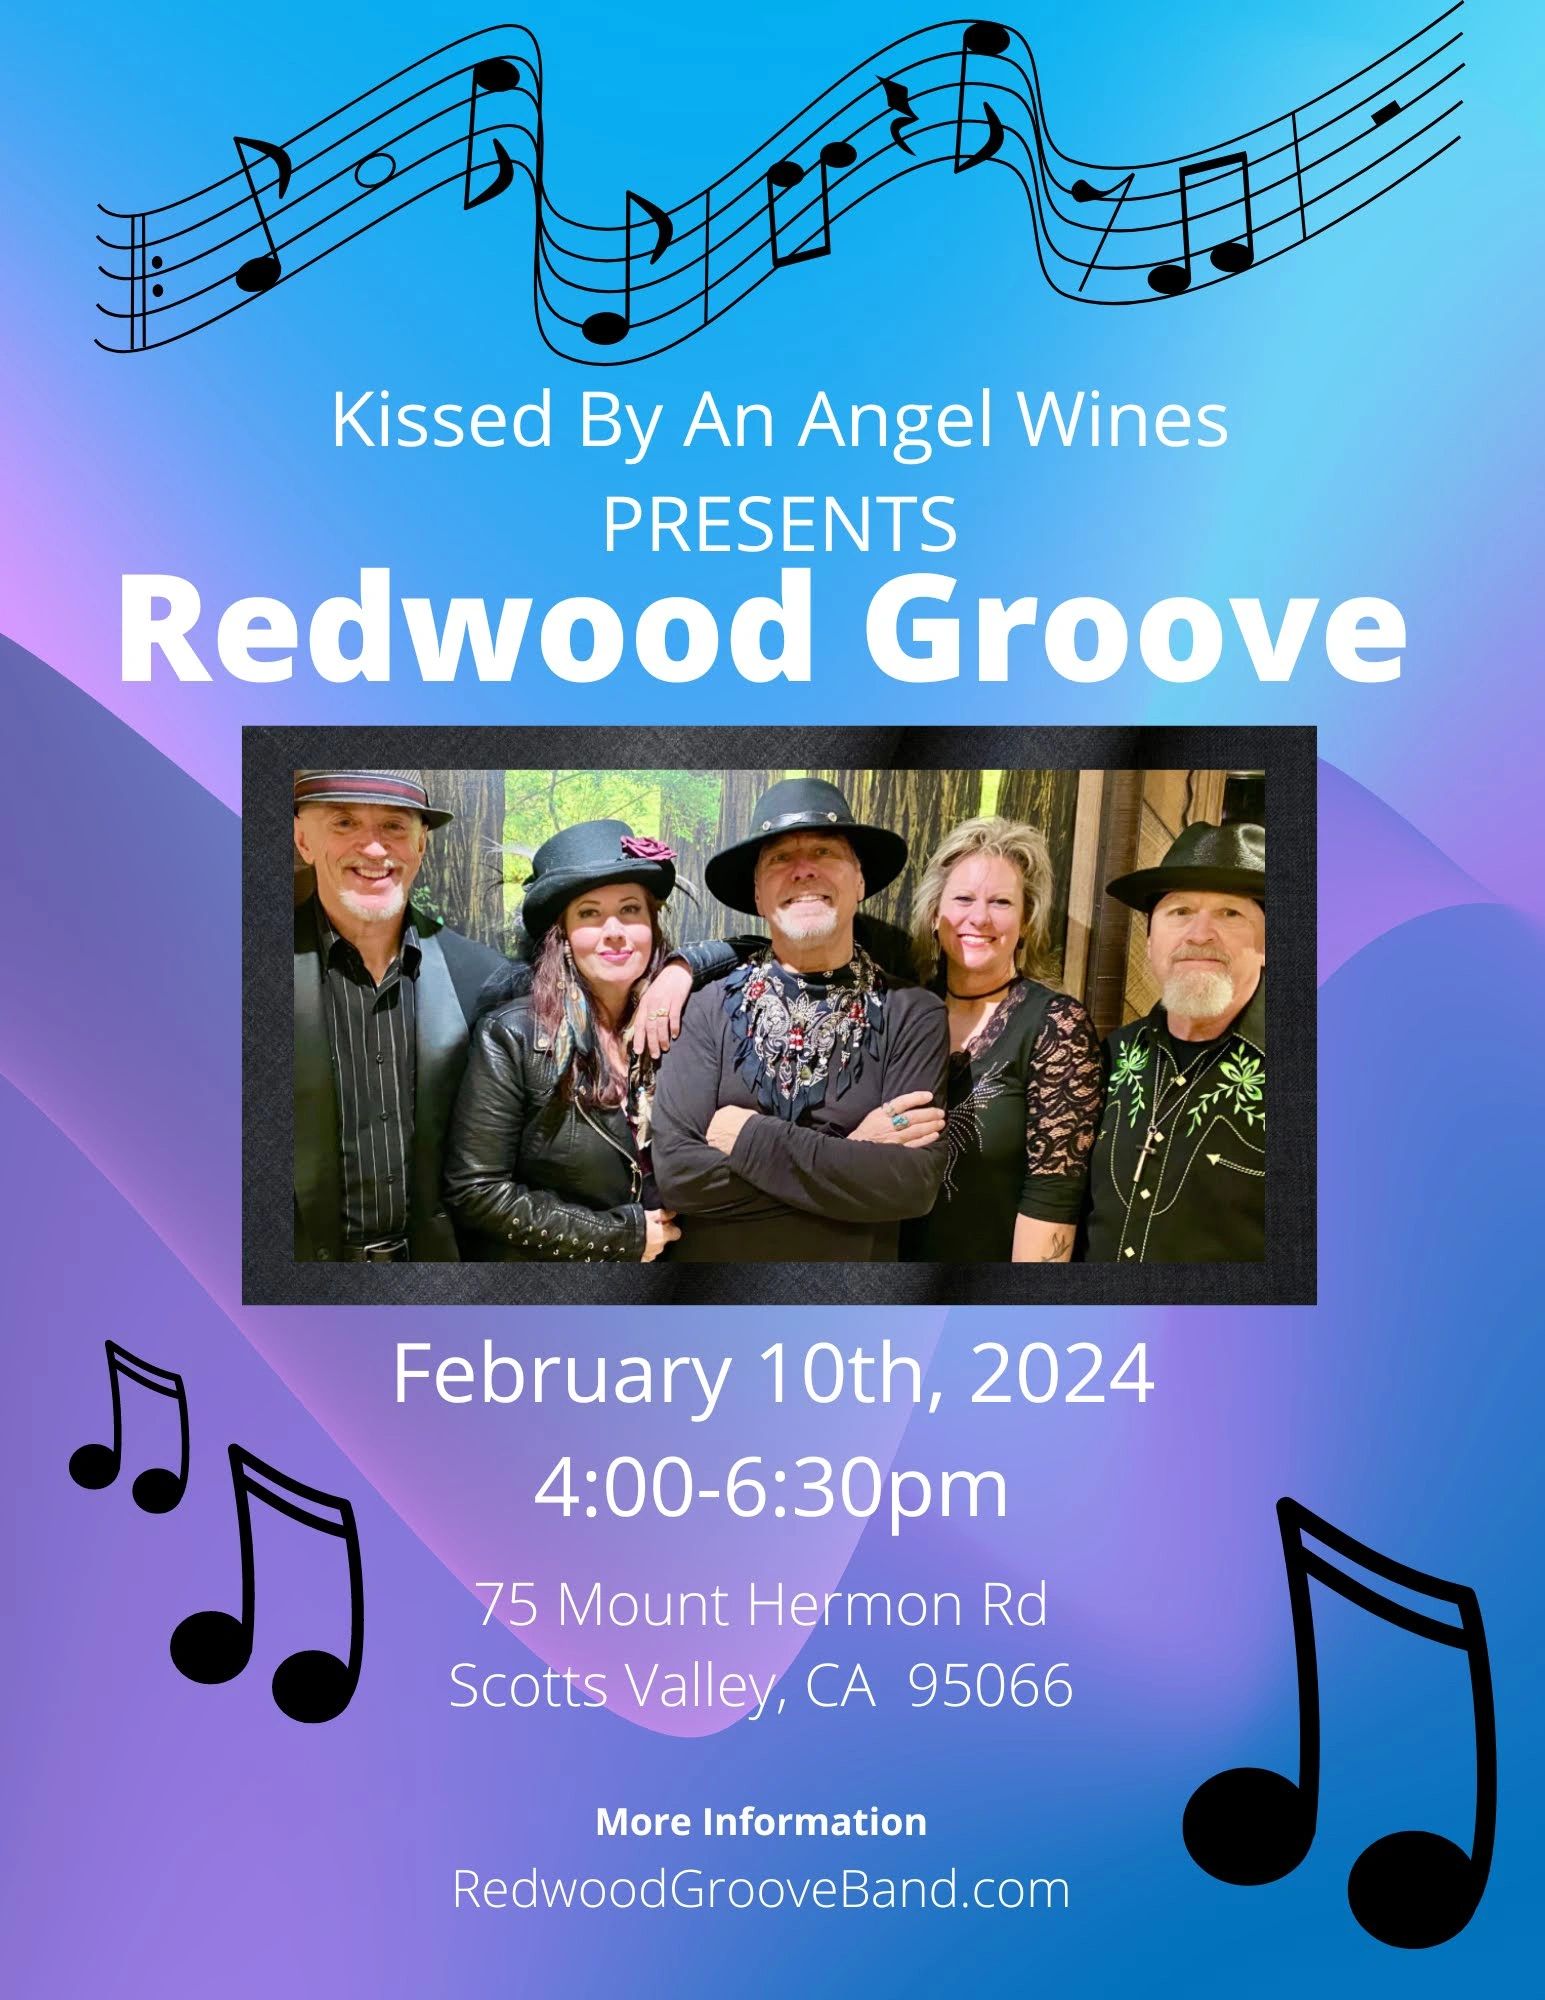 Redwood Groove flyer for Kissed By An Angel gig Scotts Valley, CA.